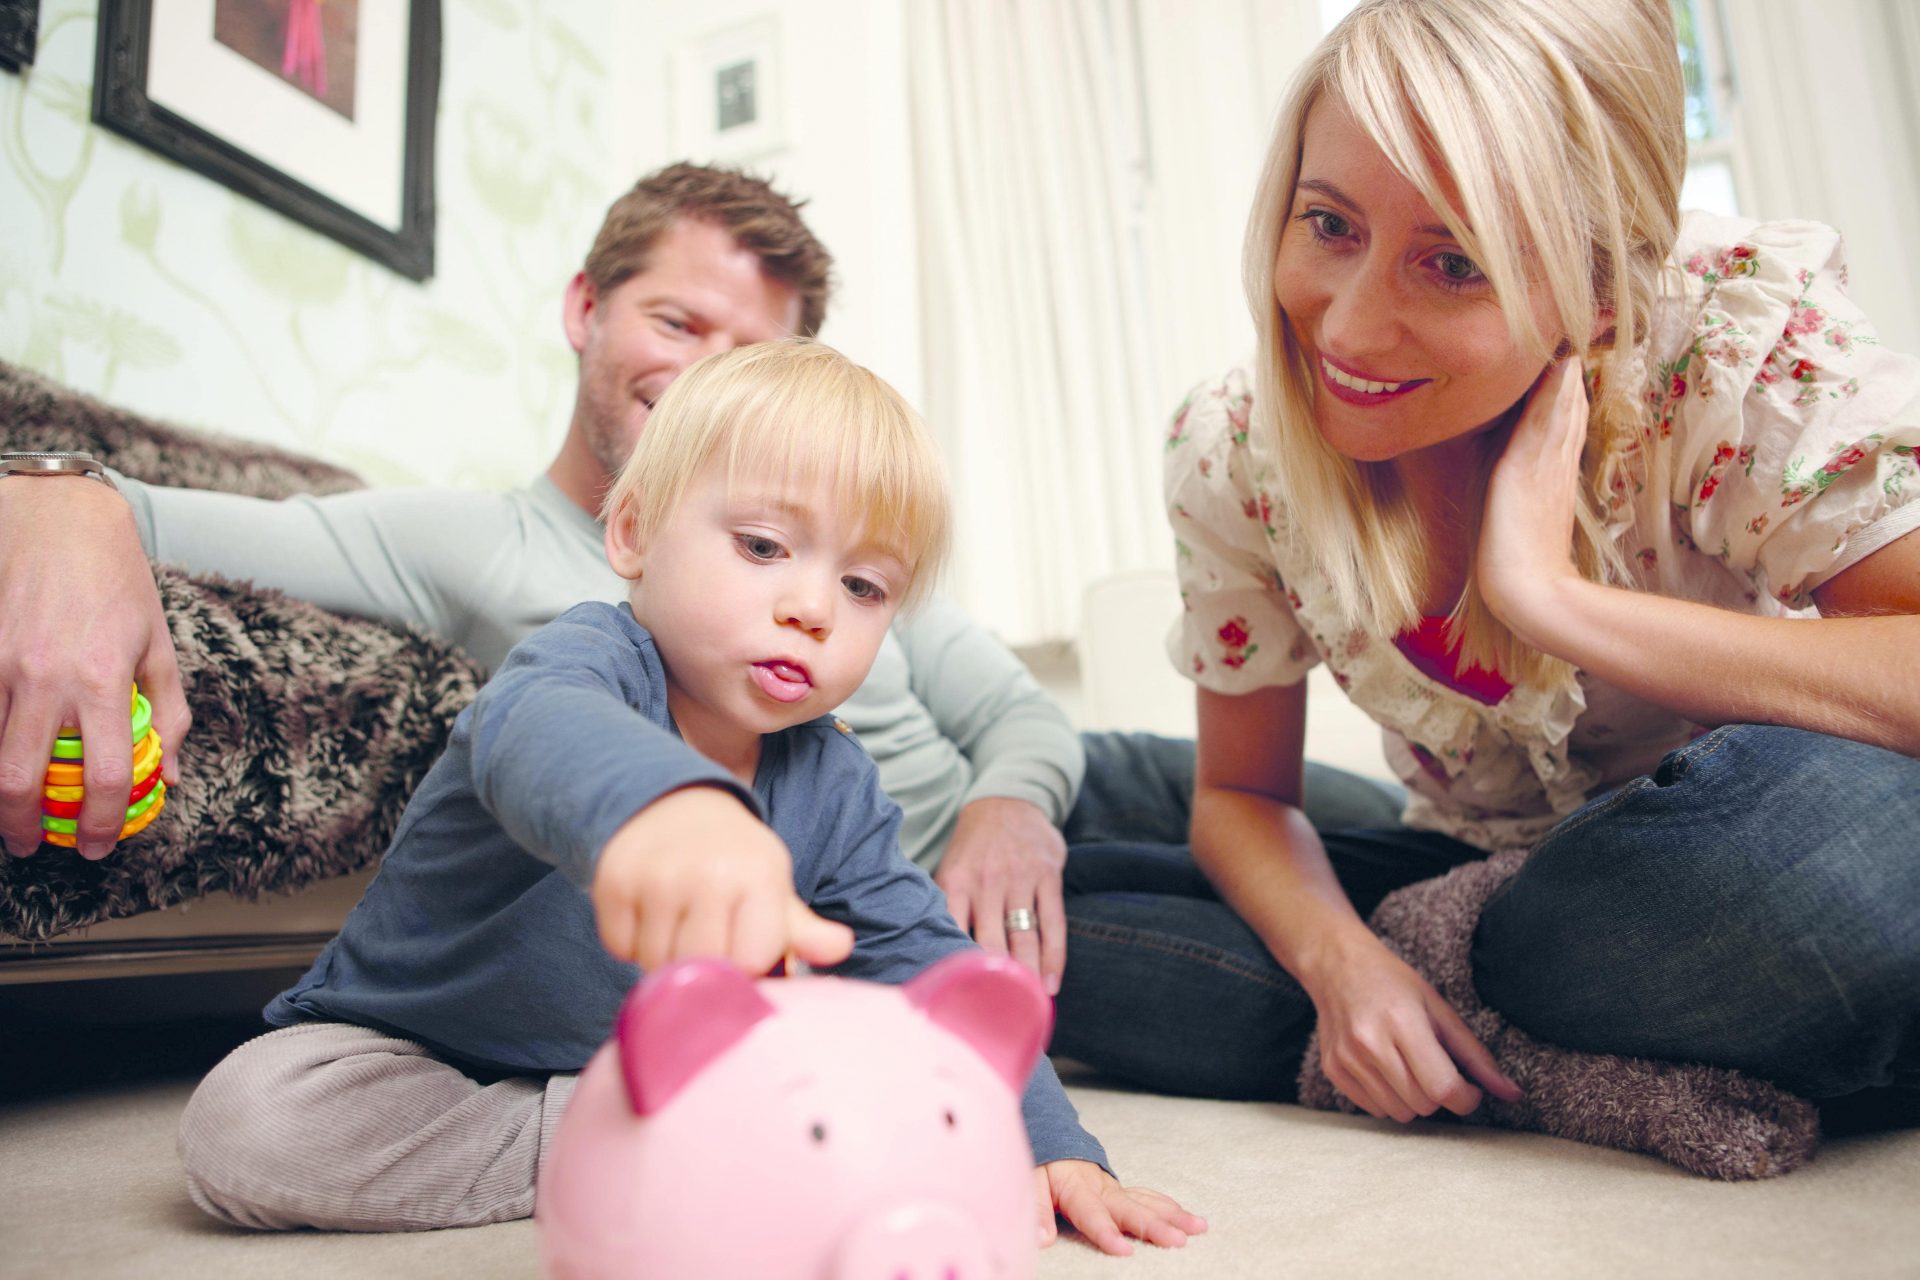 Find out if Tax-Free Childcare could help with your childcare costs